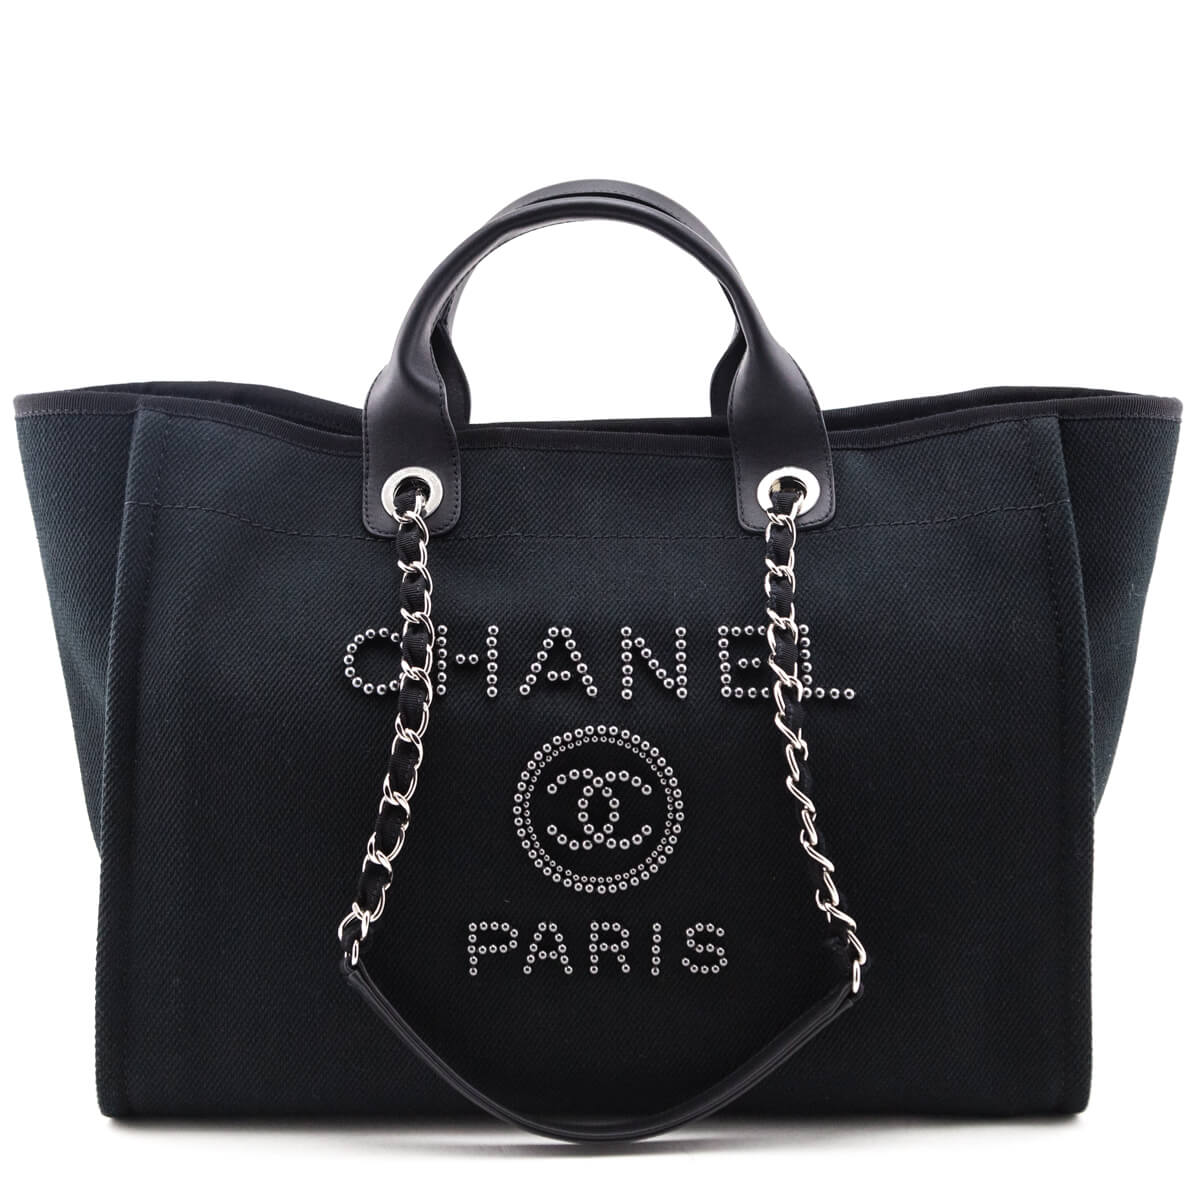 Chanel NEW 2020 Black Mixed Fibers Large Deauville Tote Bag For